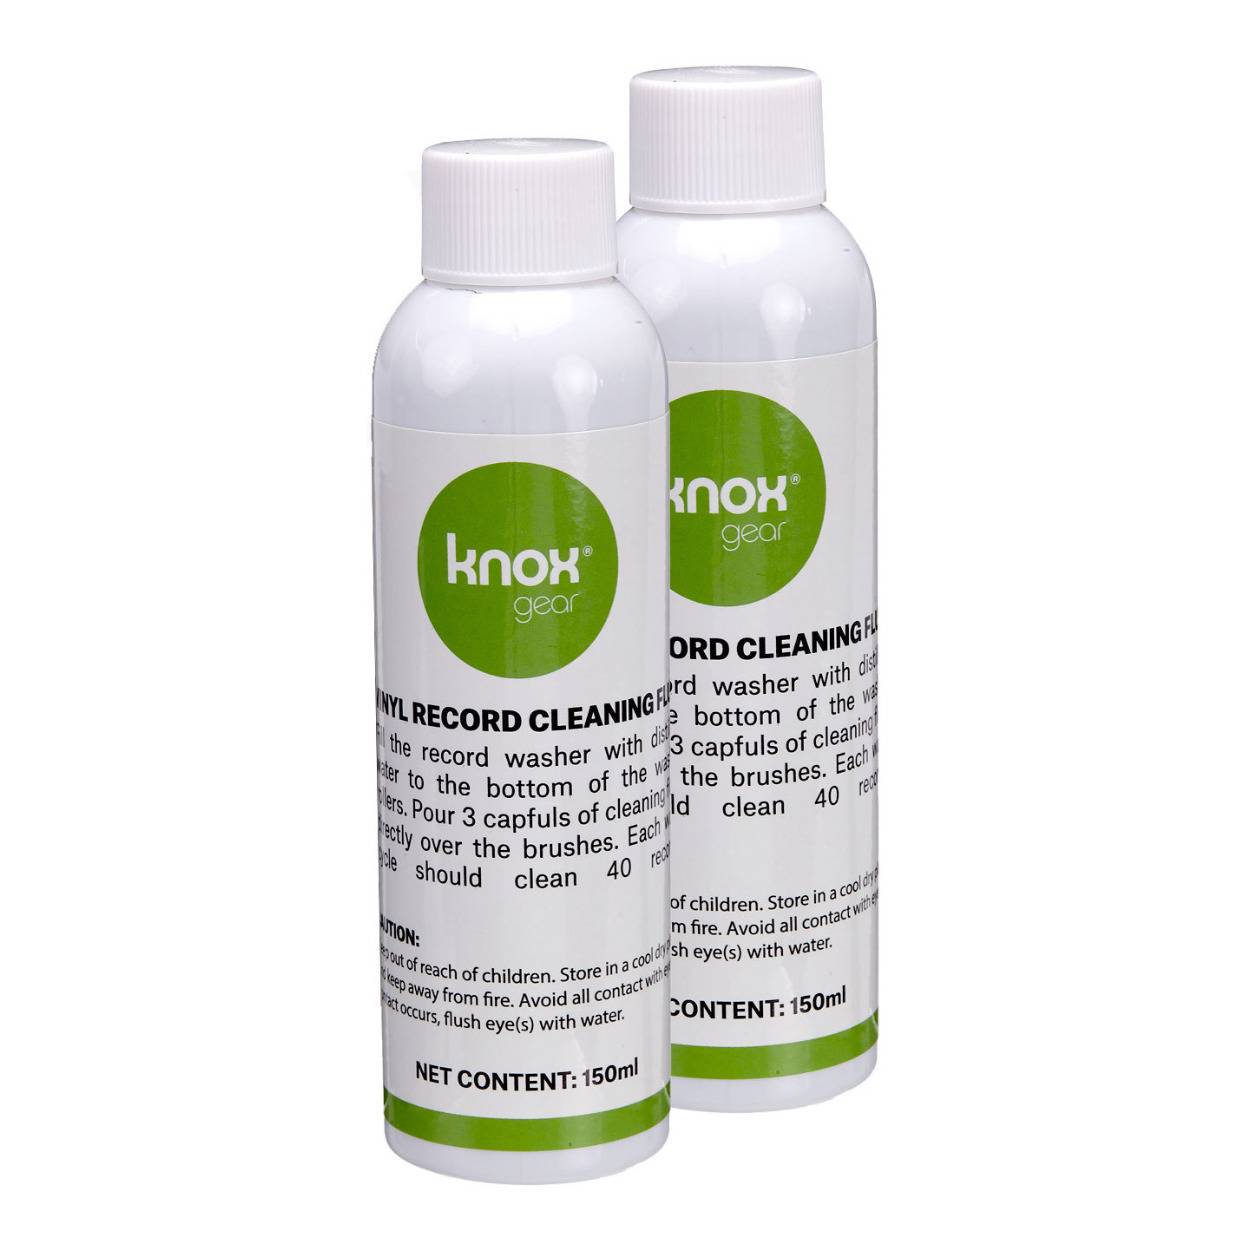 Knox Gear Cleaning Fluid for Vinyl Record Cleaner (2-pack)